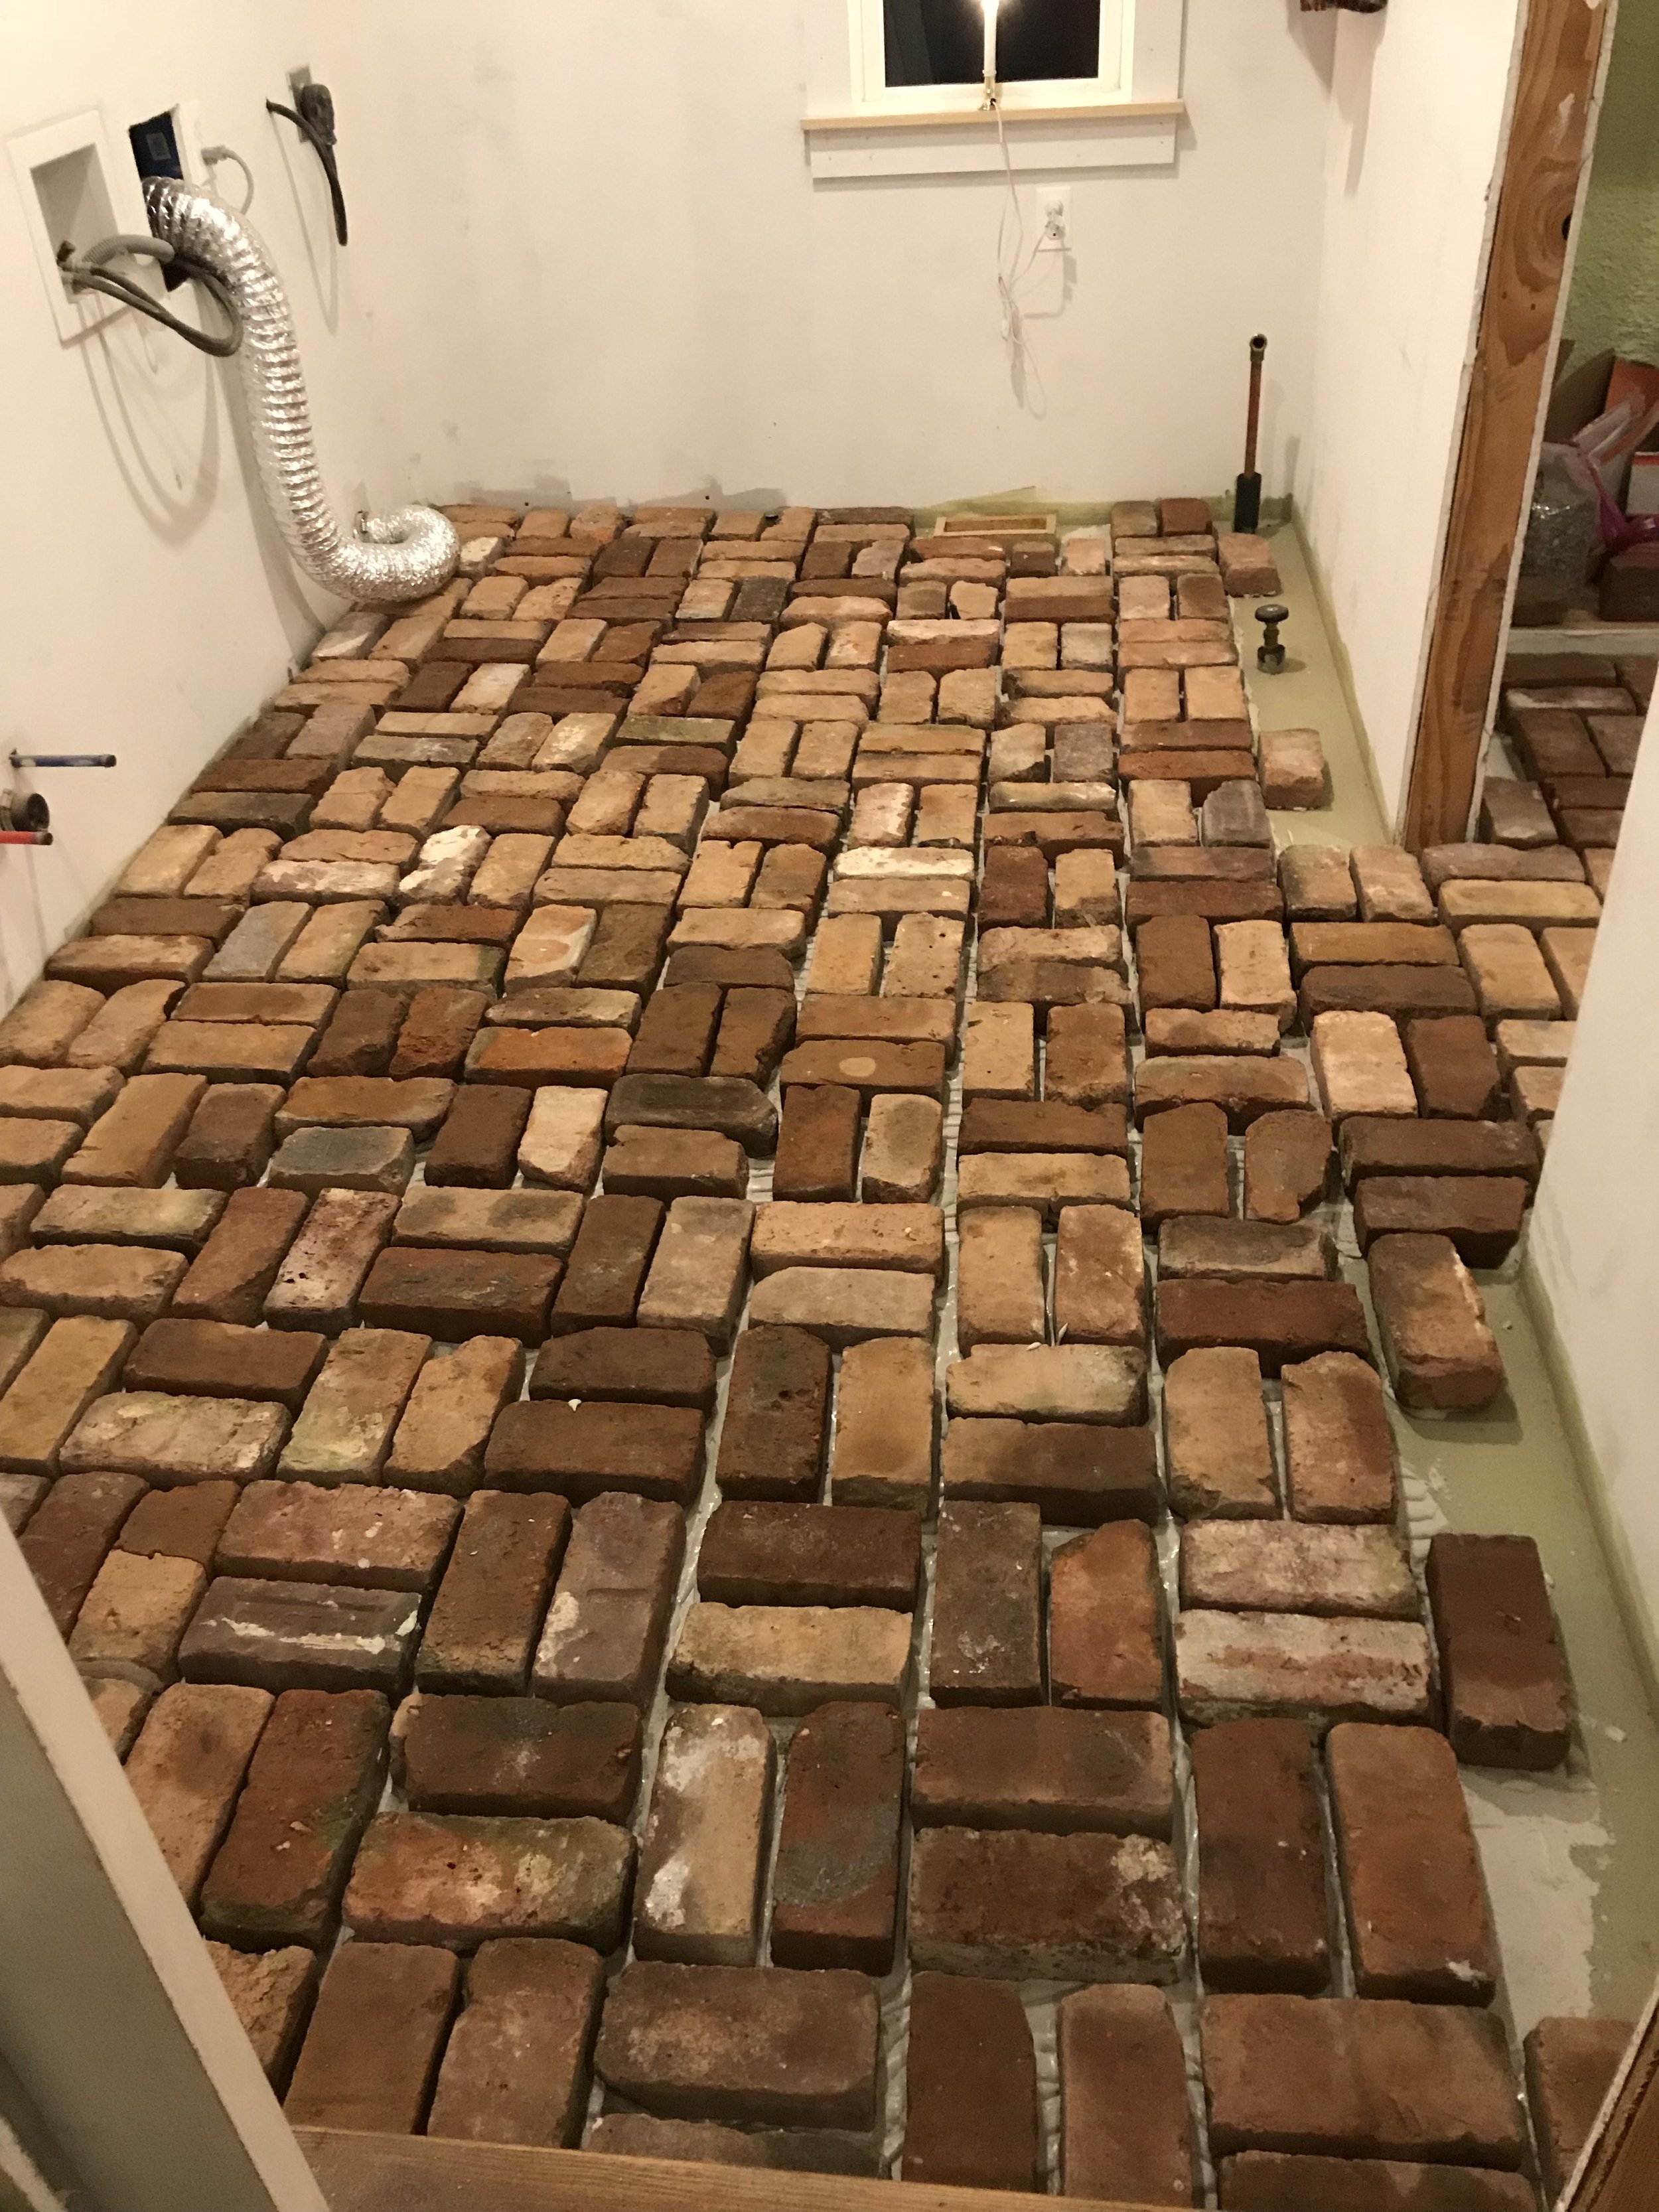  Next up was installing the reclaimed bricks in a basketweave pattern. 